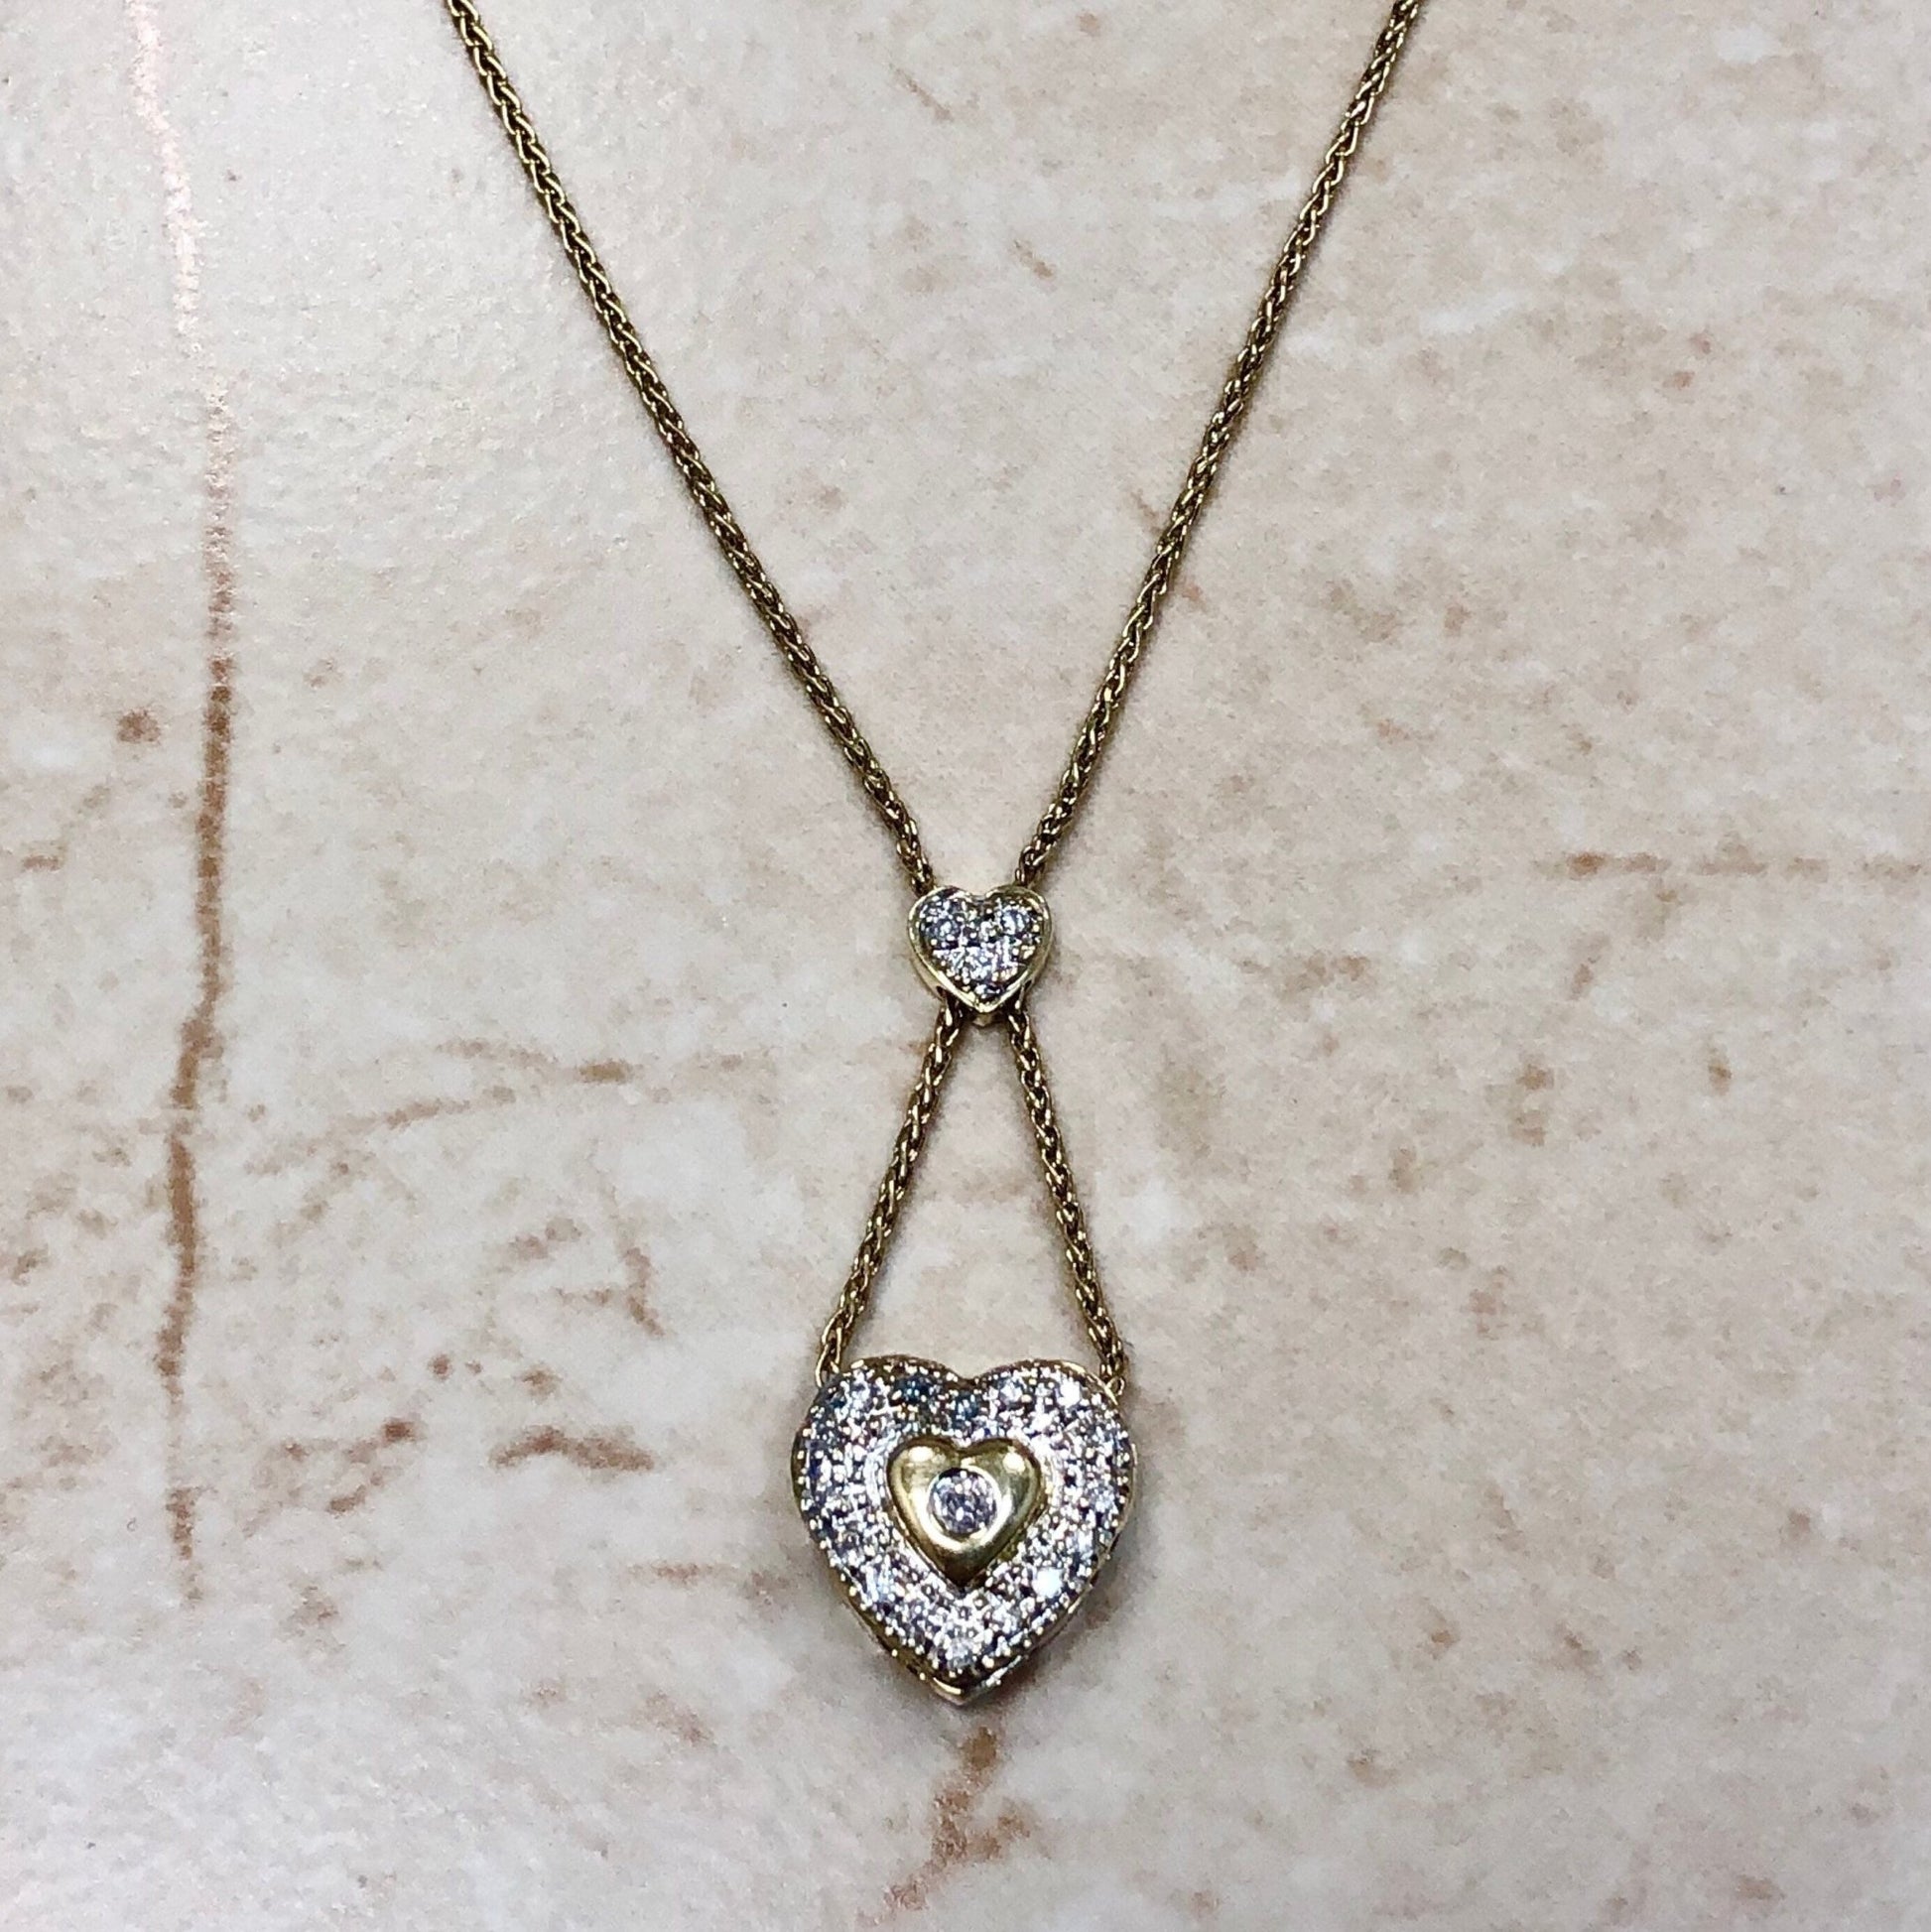 14K Diamond Heart Pendant Necklace - Yellow Gold Diamond Pendant - Gold Heart Necklace - Birthday Gift - Valentine’s Day Gifts For Her